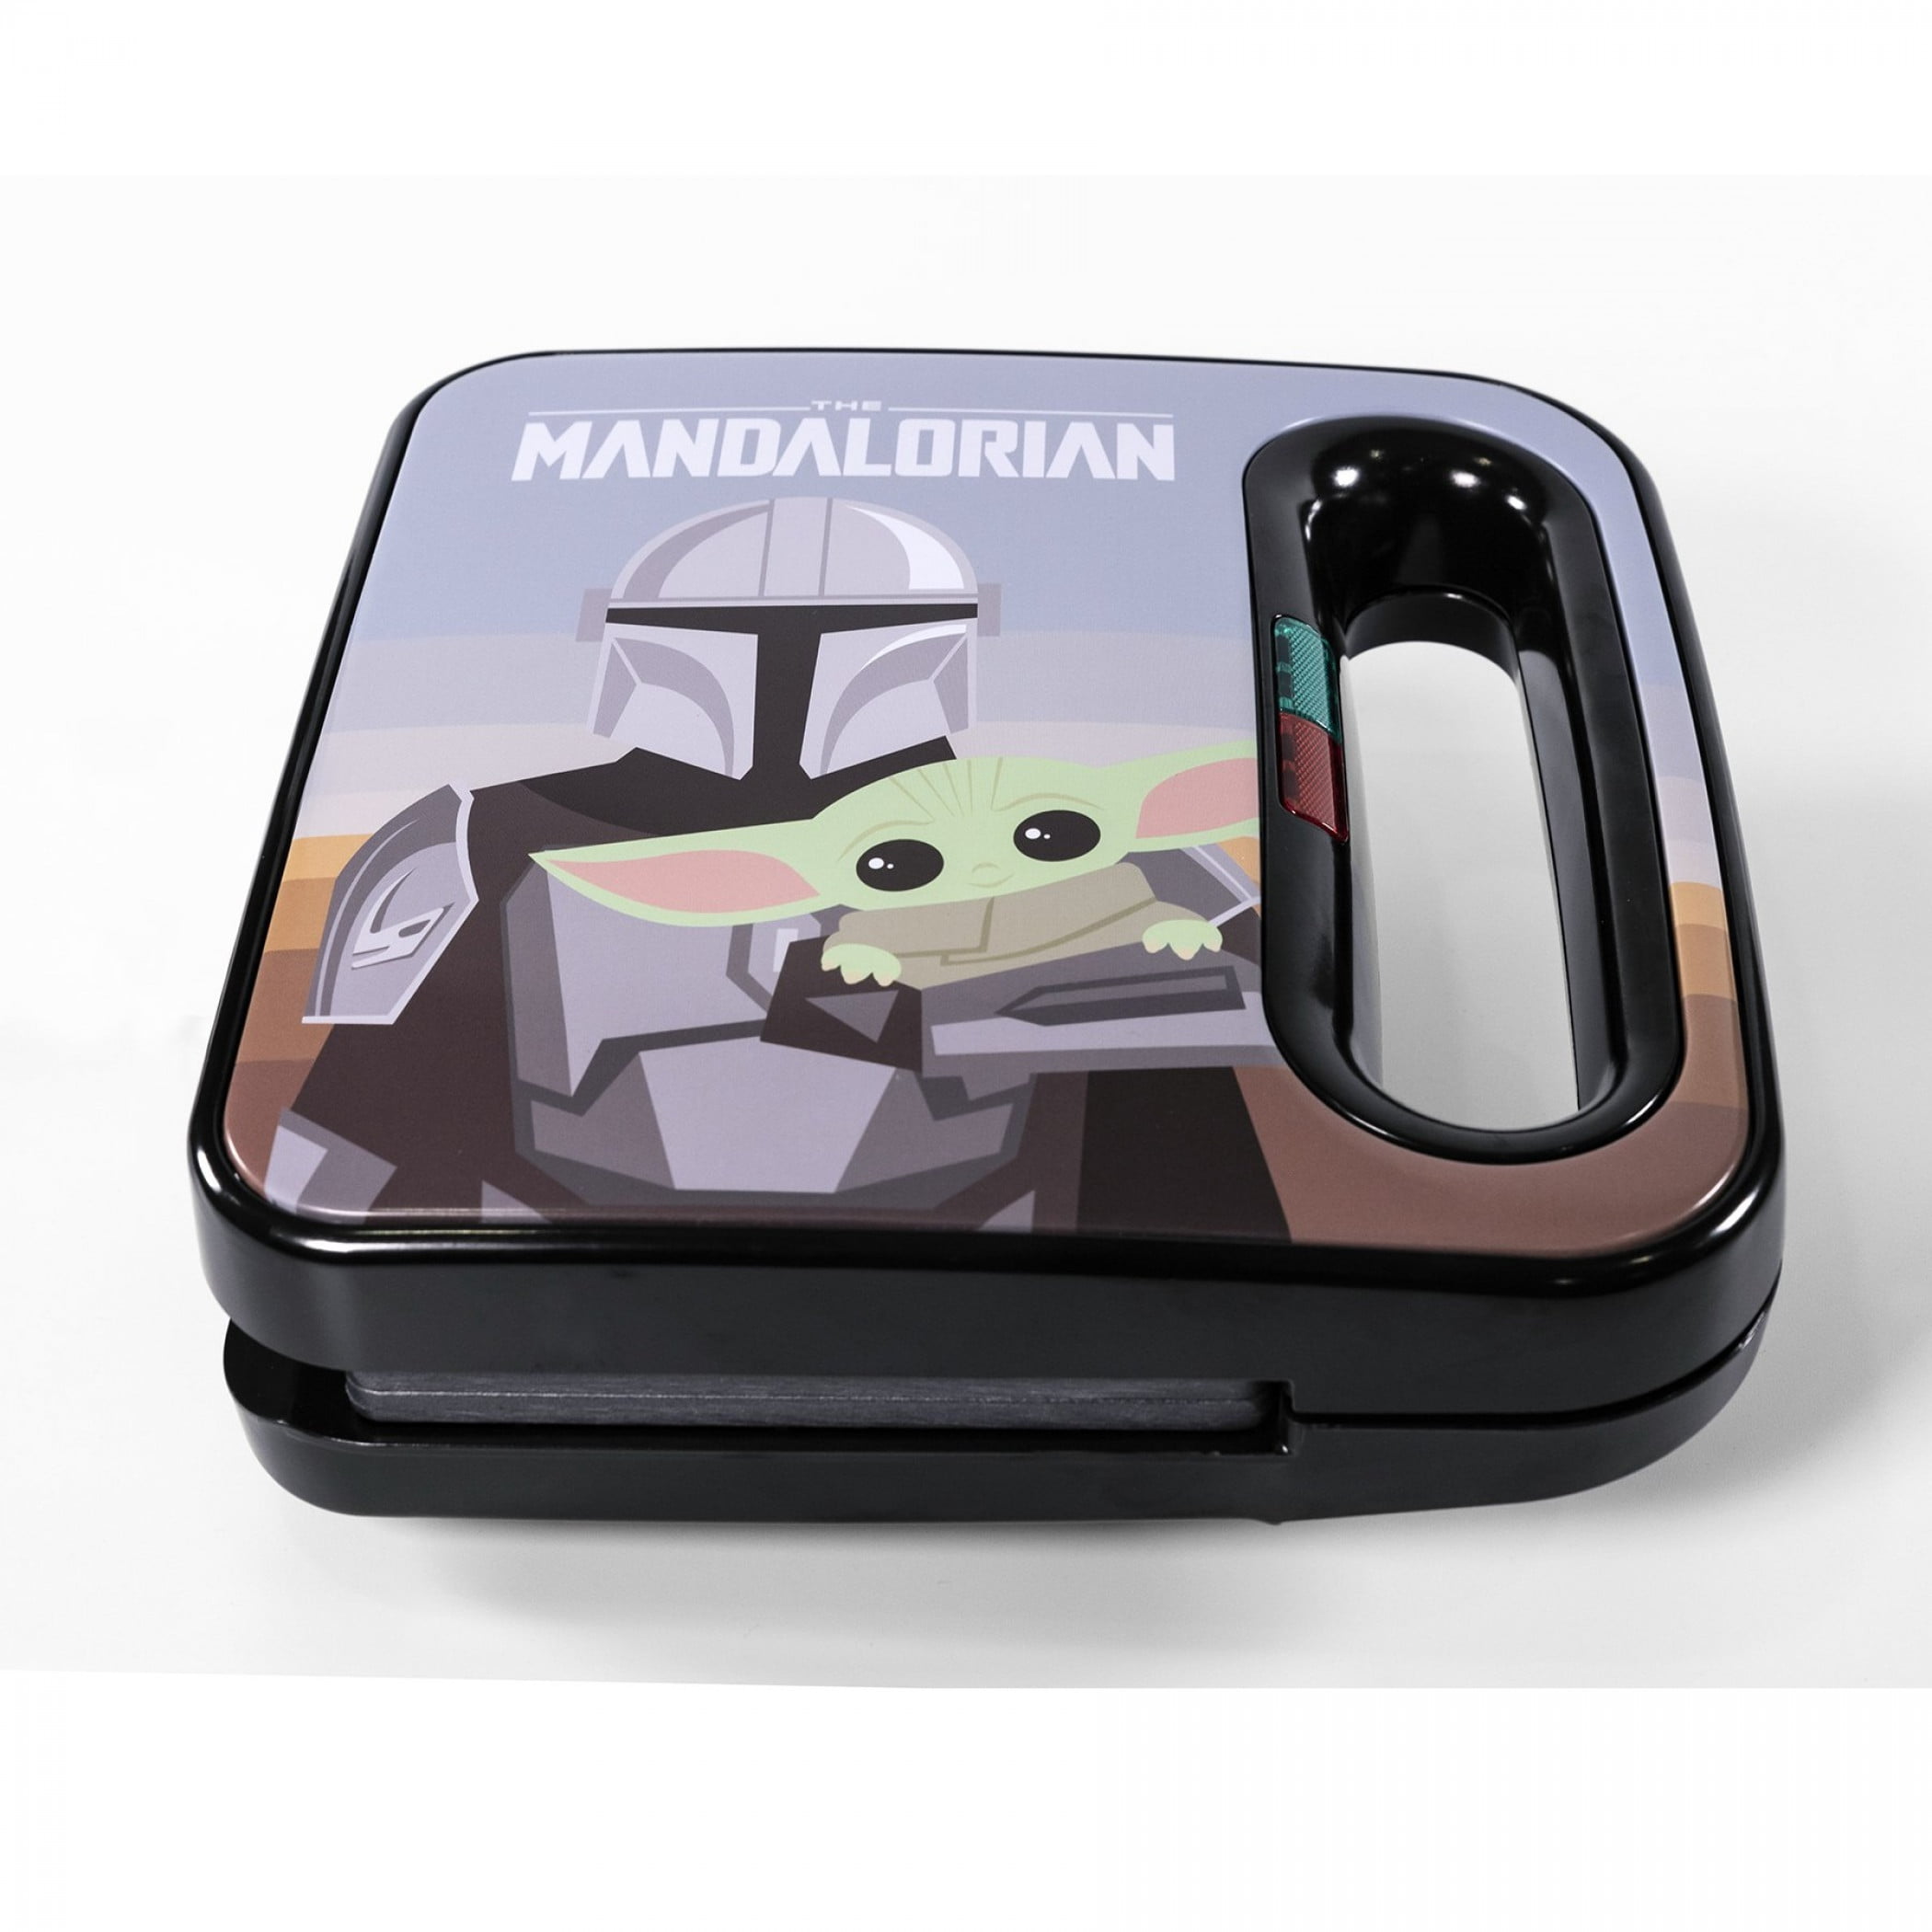 Uncanny Brands The Mandalorian Grilled Cheese Maker/Panini Press/Grill -  20235898